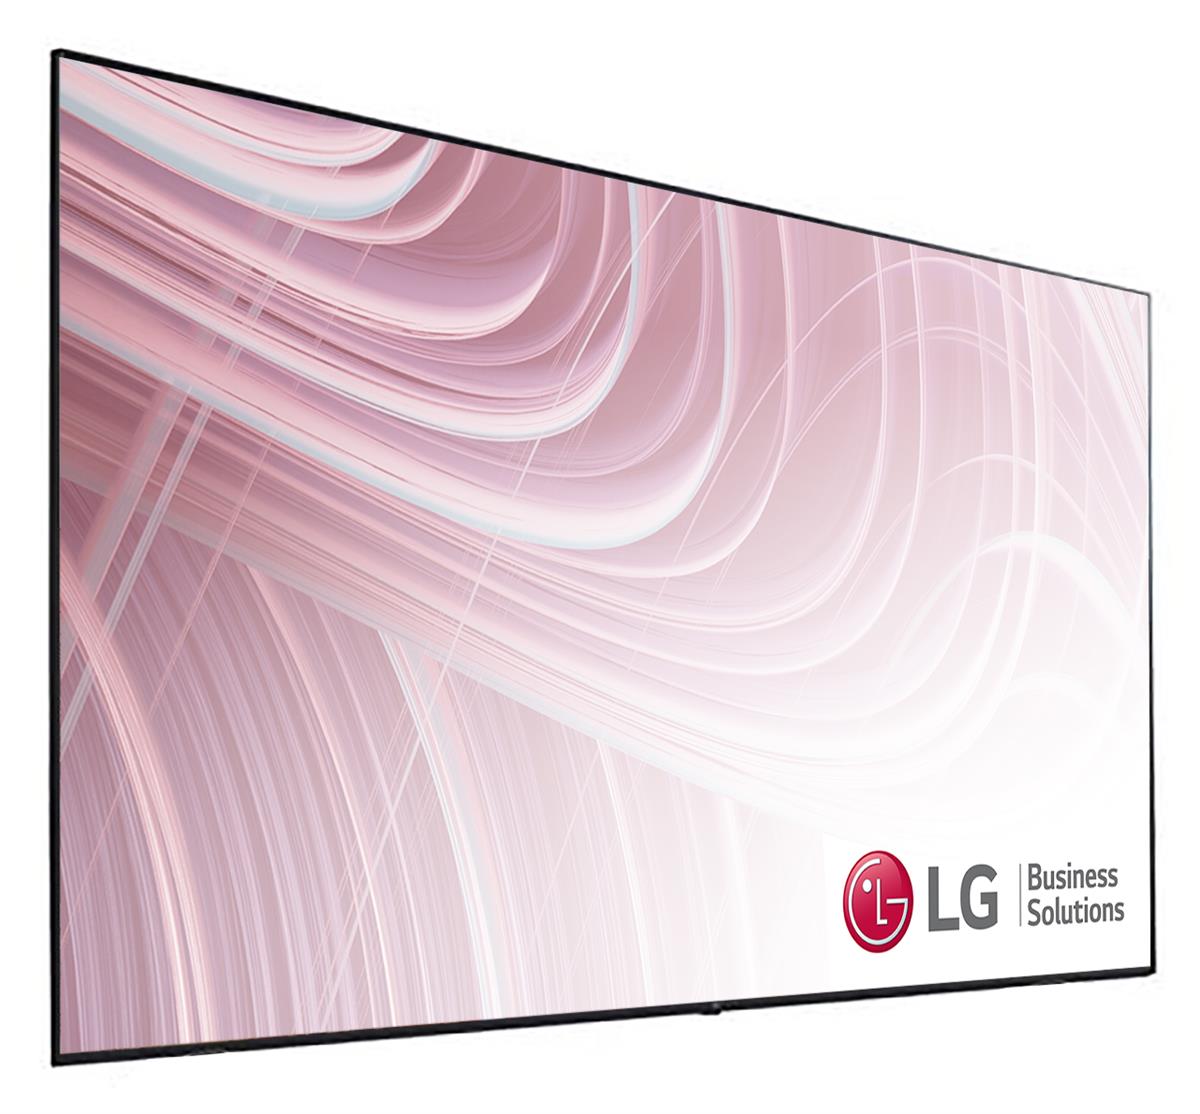 86 inch 4K Ultra HD TV with advertising software LG SuperSign